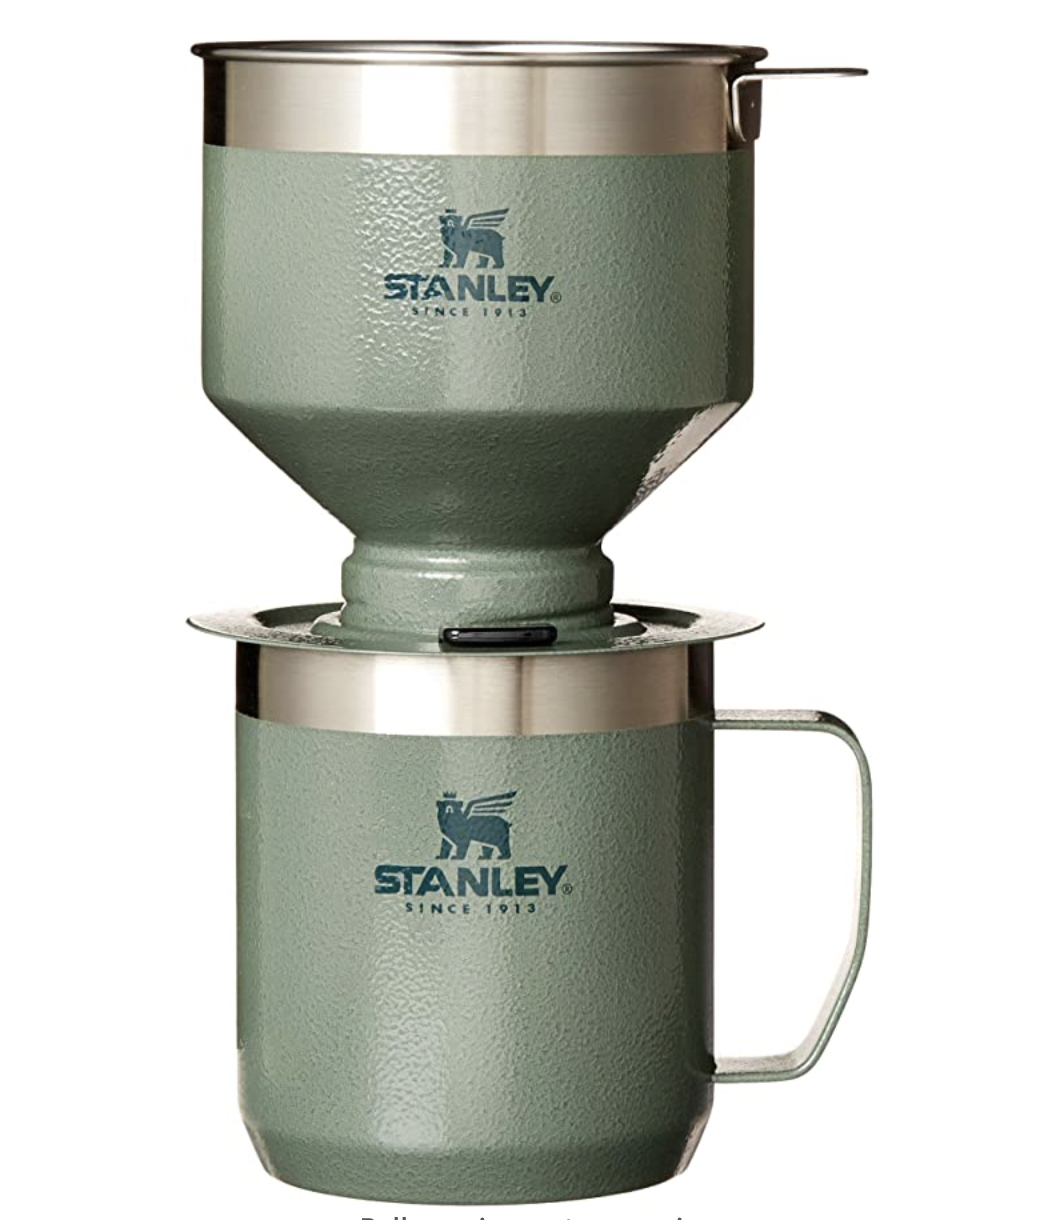 stanley camping useful gift for vanlifers